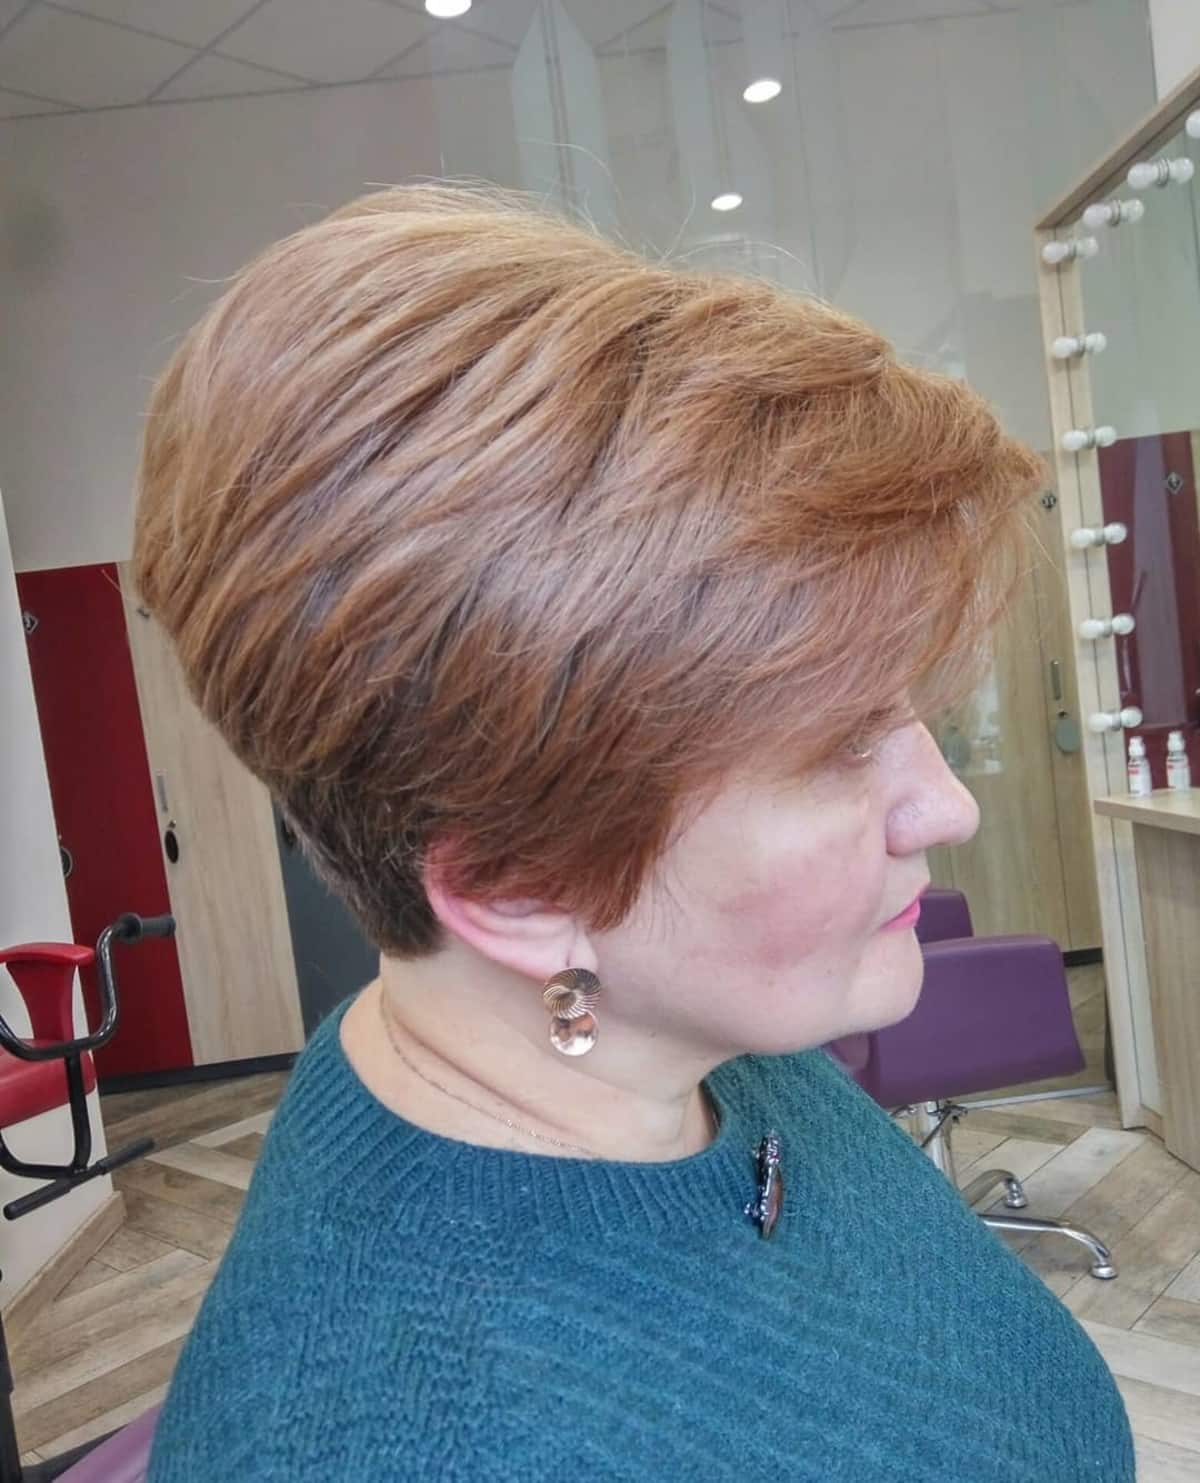 The 45 Most Youthful Short Hairstyles for Women Over 50